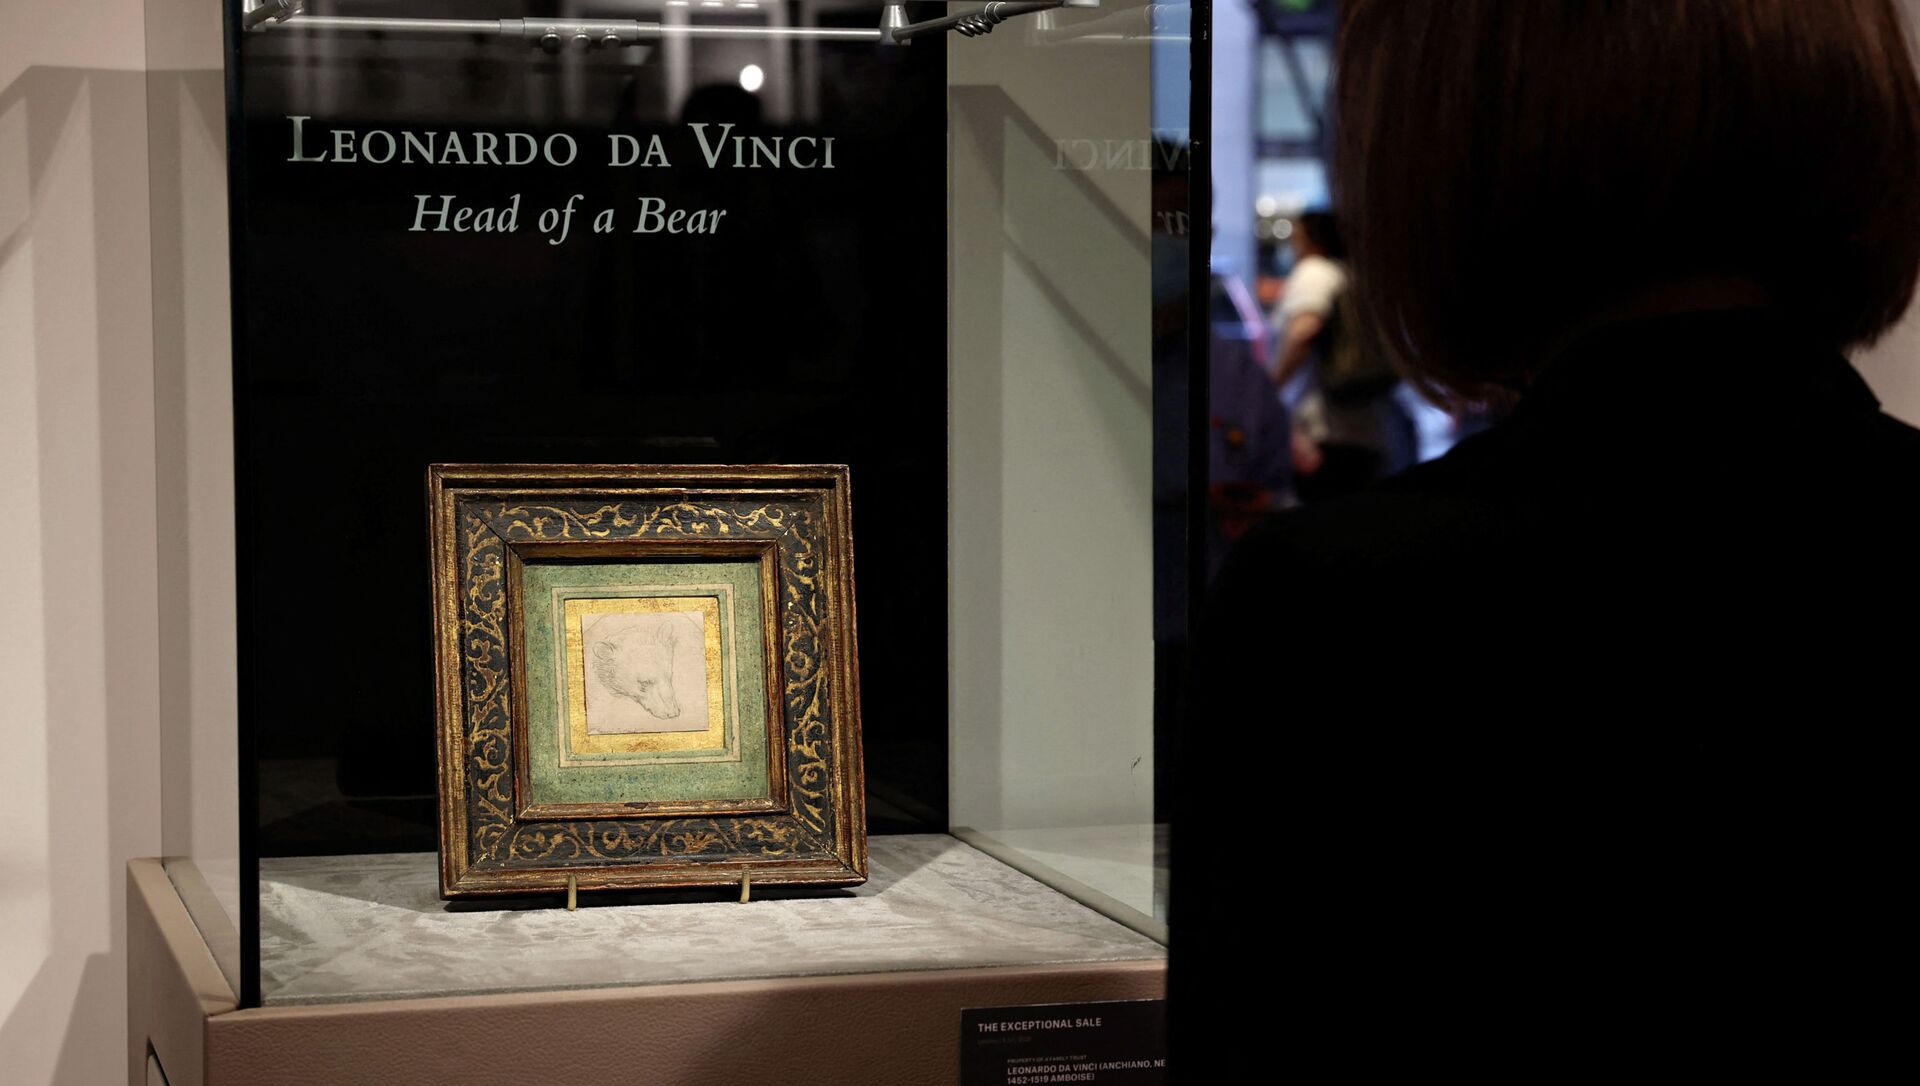 Leonardo da Vinci's 'Head of a Bear' is on display at Christie's on May 11, 2021 in New York City. Christie's will offer the rare 2 ѕ x 2 ѕ inches (7 x 7 cm) silverpoint drawing during a live auction in London on July 8, 2021 - Sputnik International, 1920, 11.07.2021